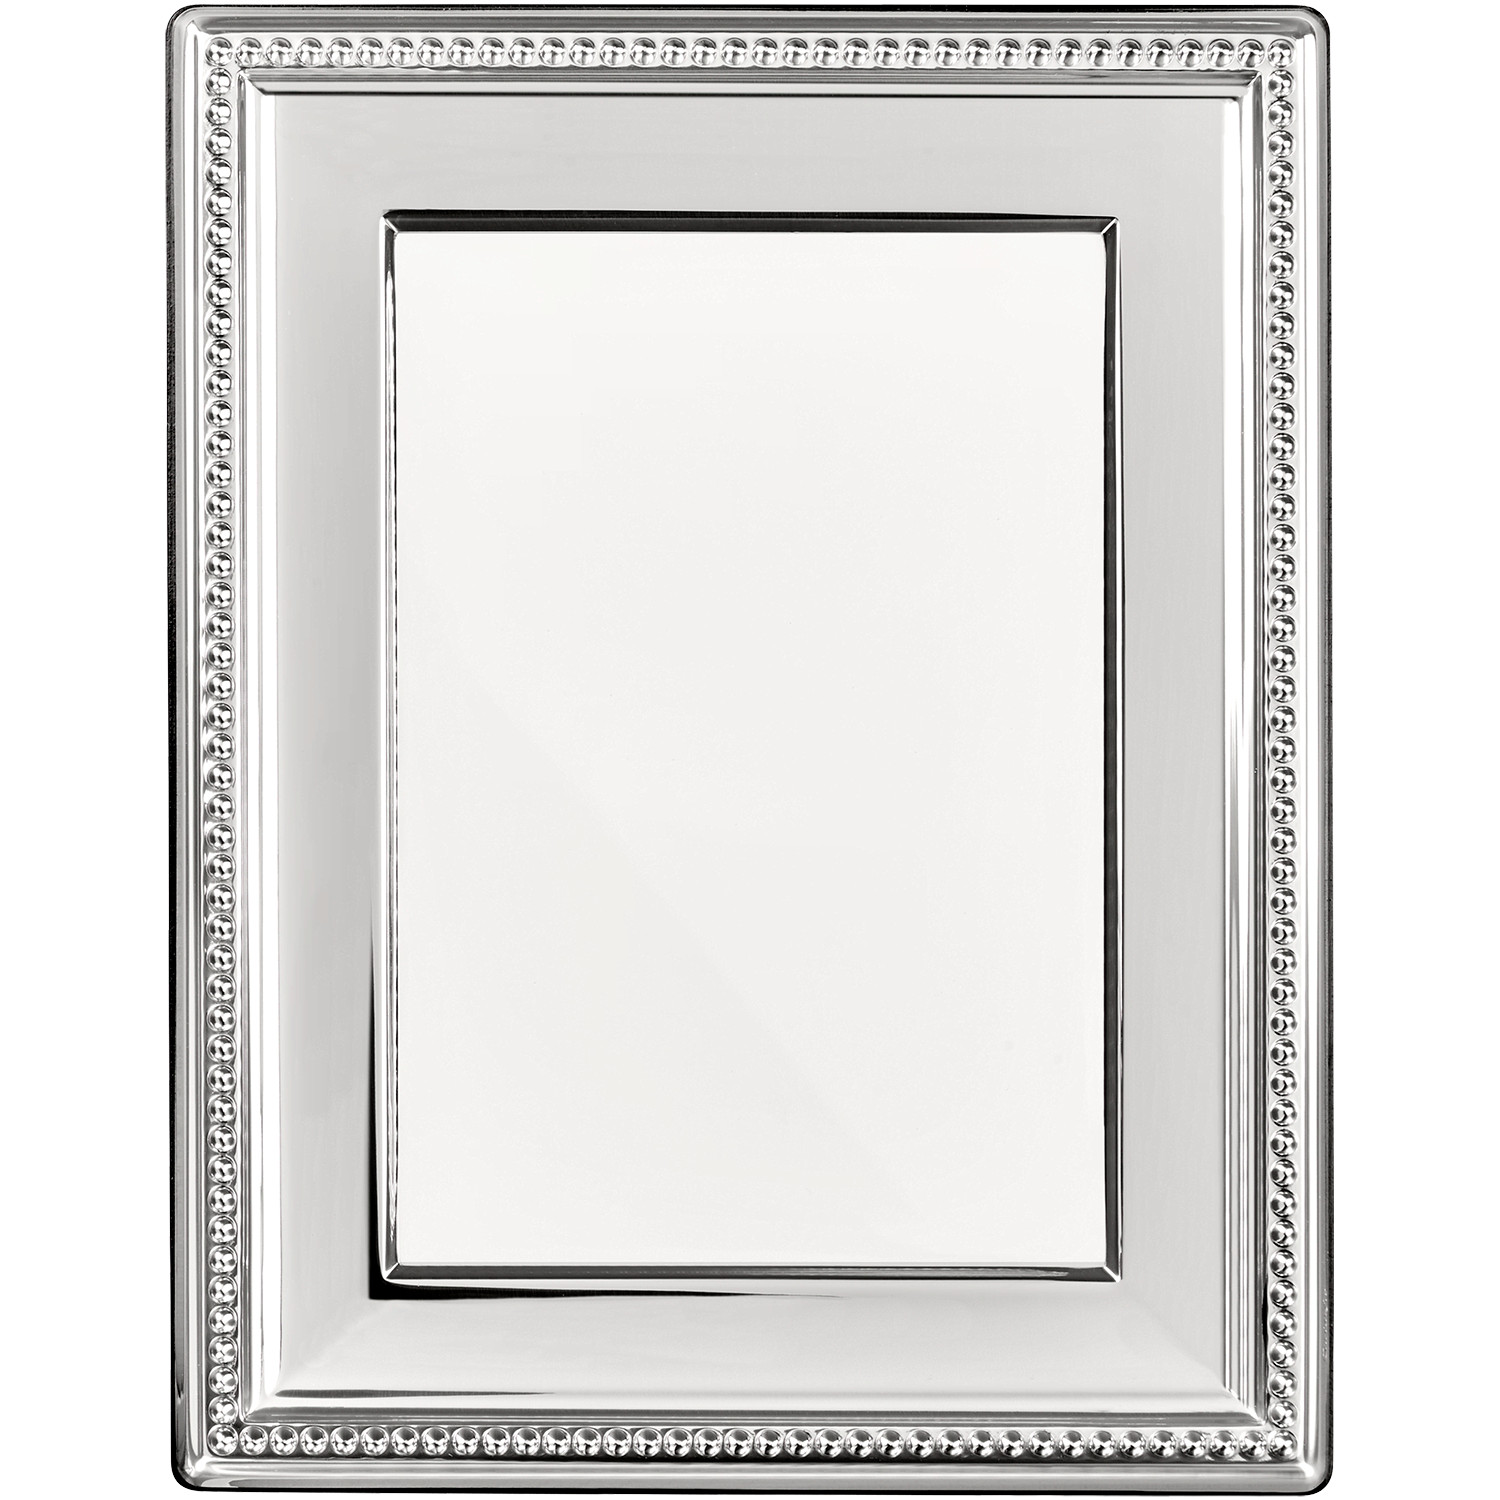 Sterling silver picture frame for 10x15cm photos